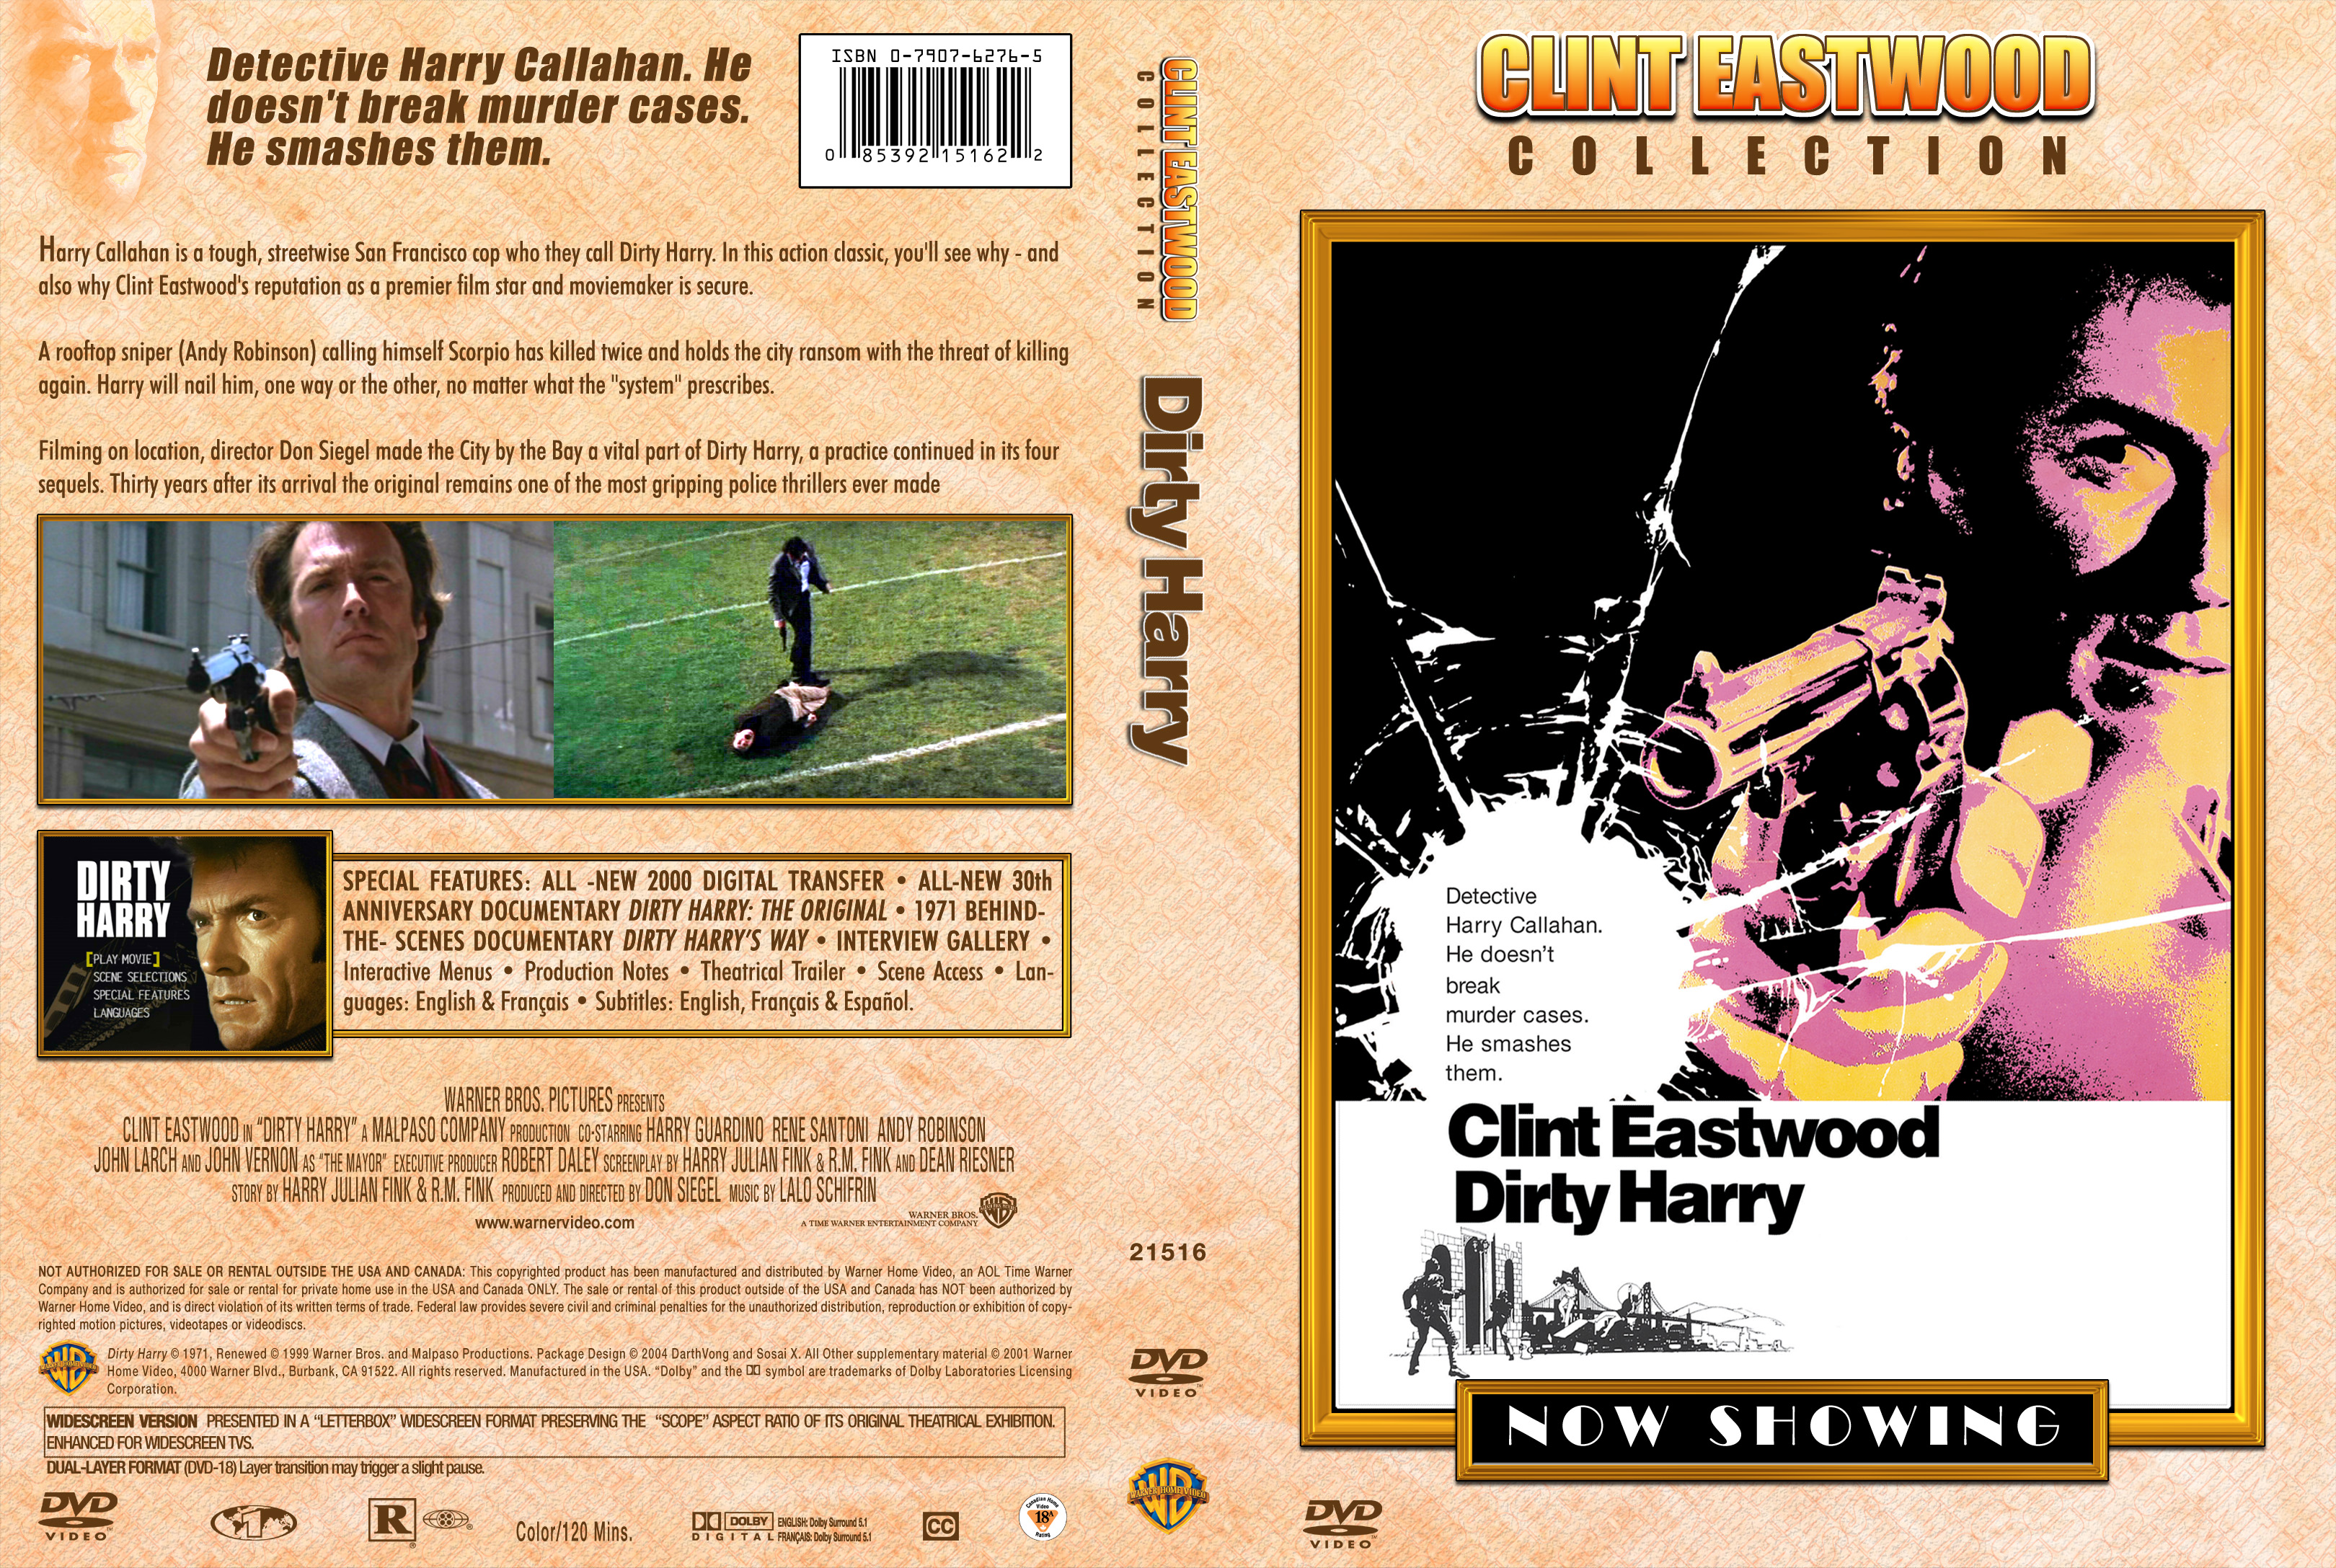 Clint Eastwood Collection - Dirty Harry